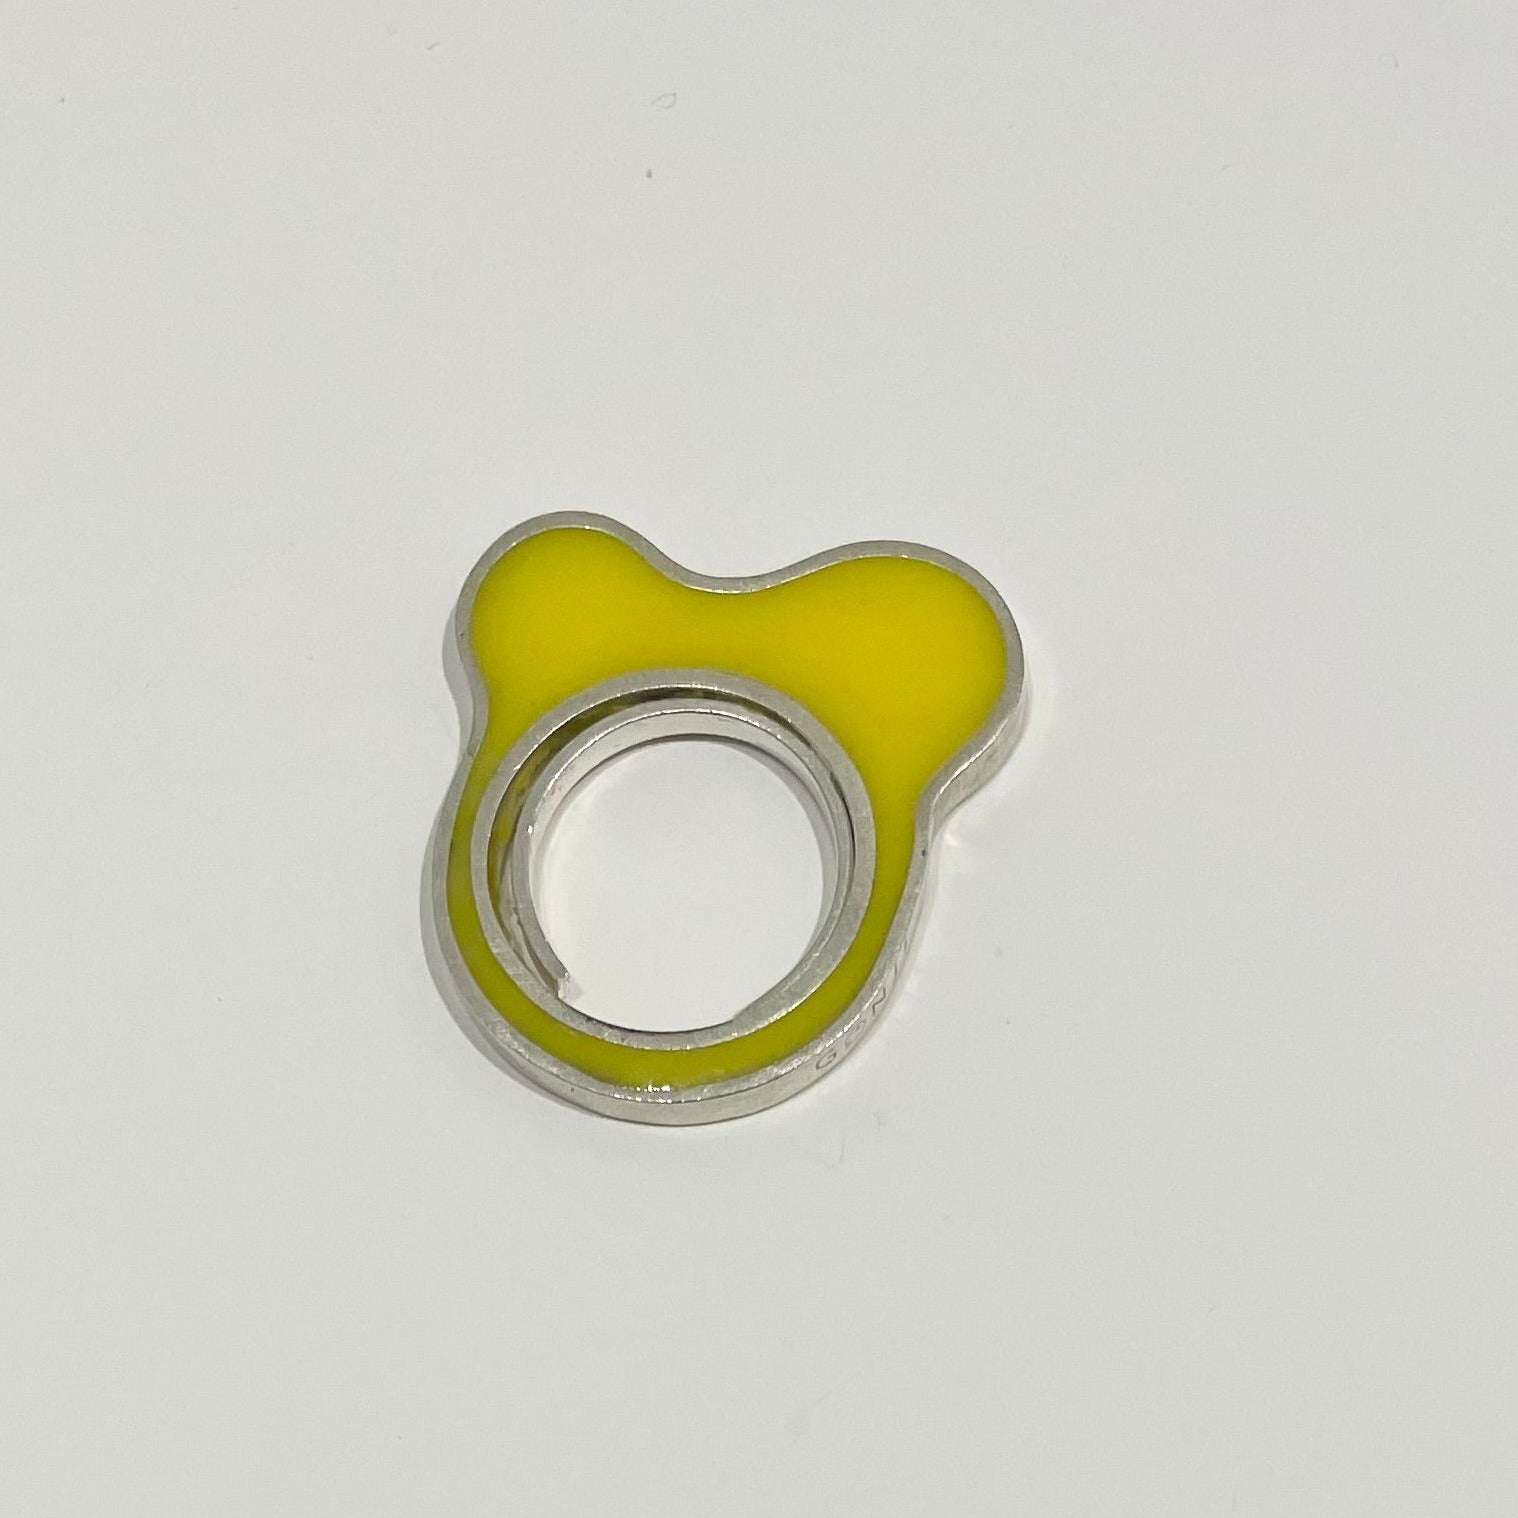 Ring made by silver and filed by yellow epoxy resin.